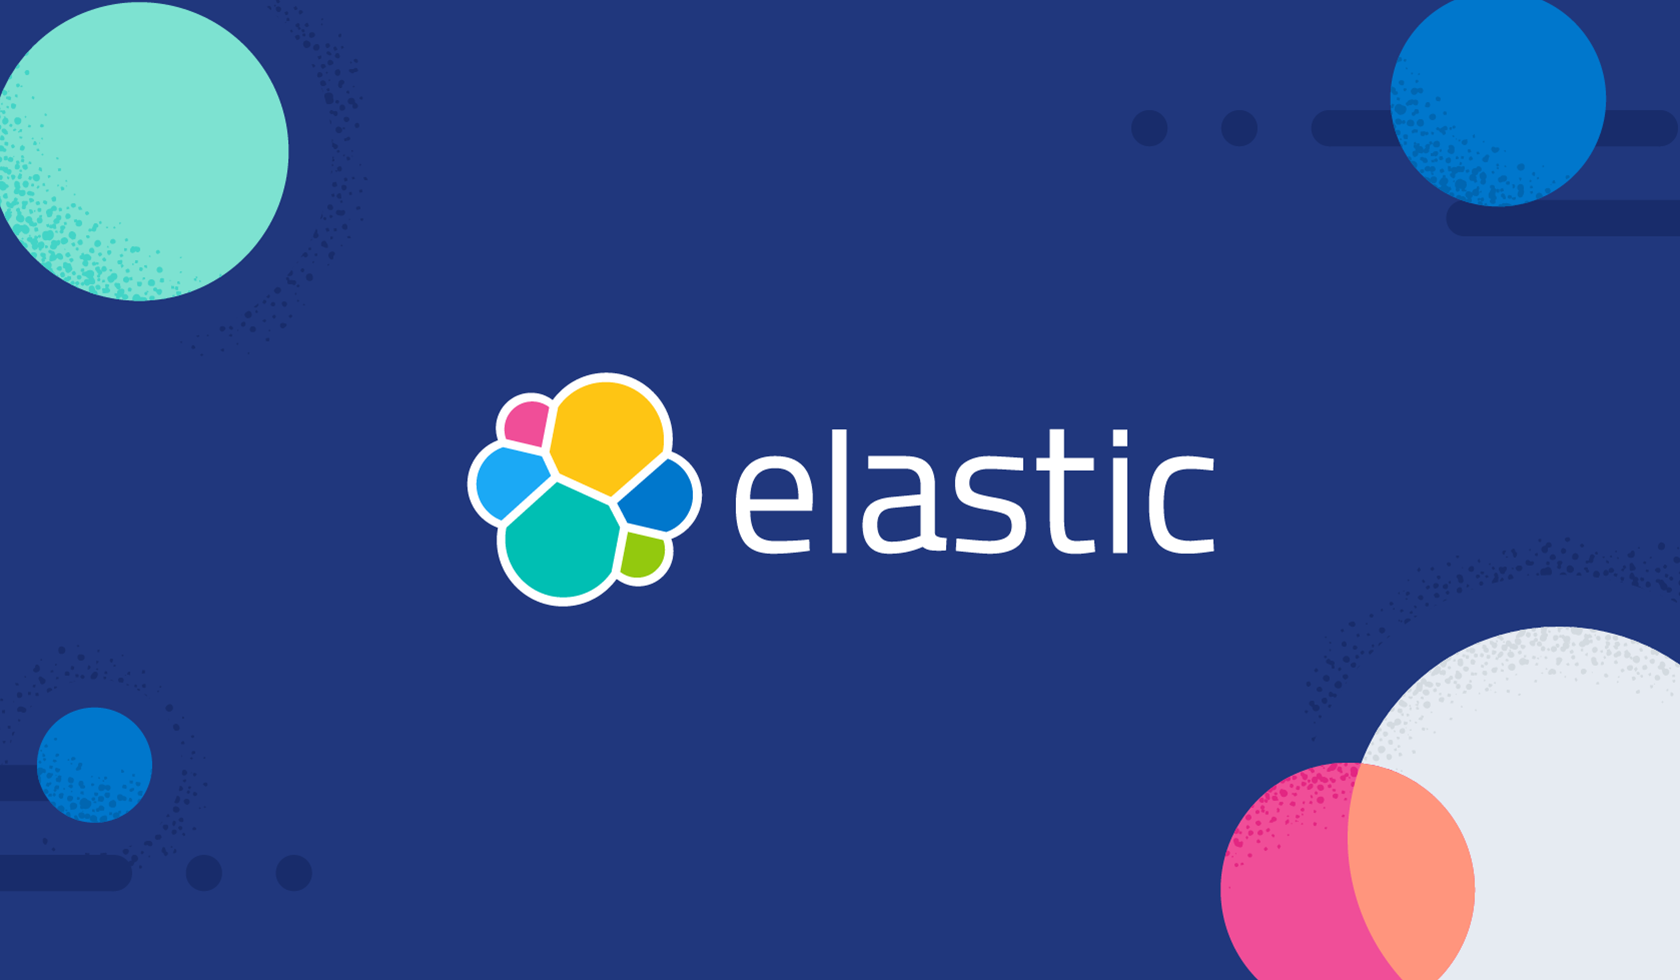 library-branding-elastic-midnight-1680x980.png